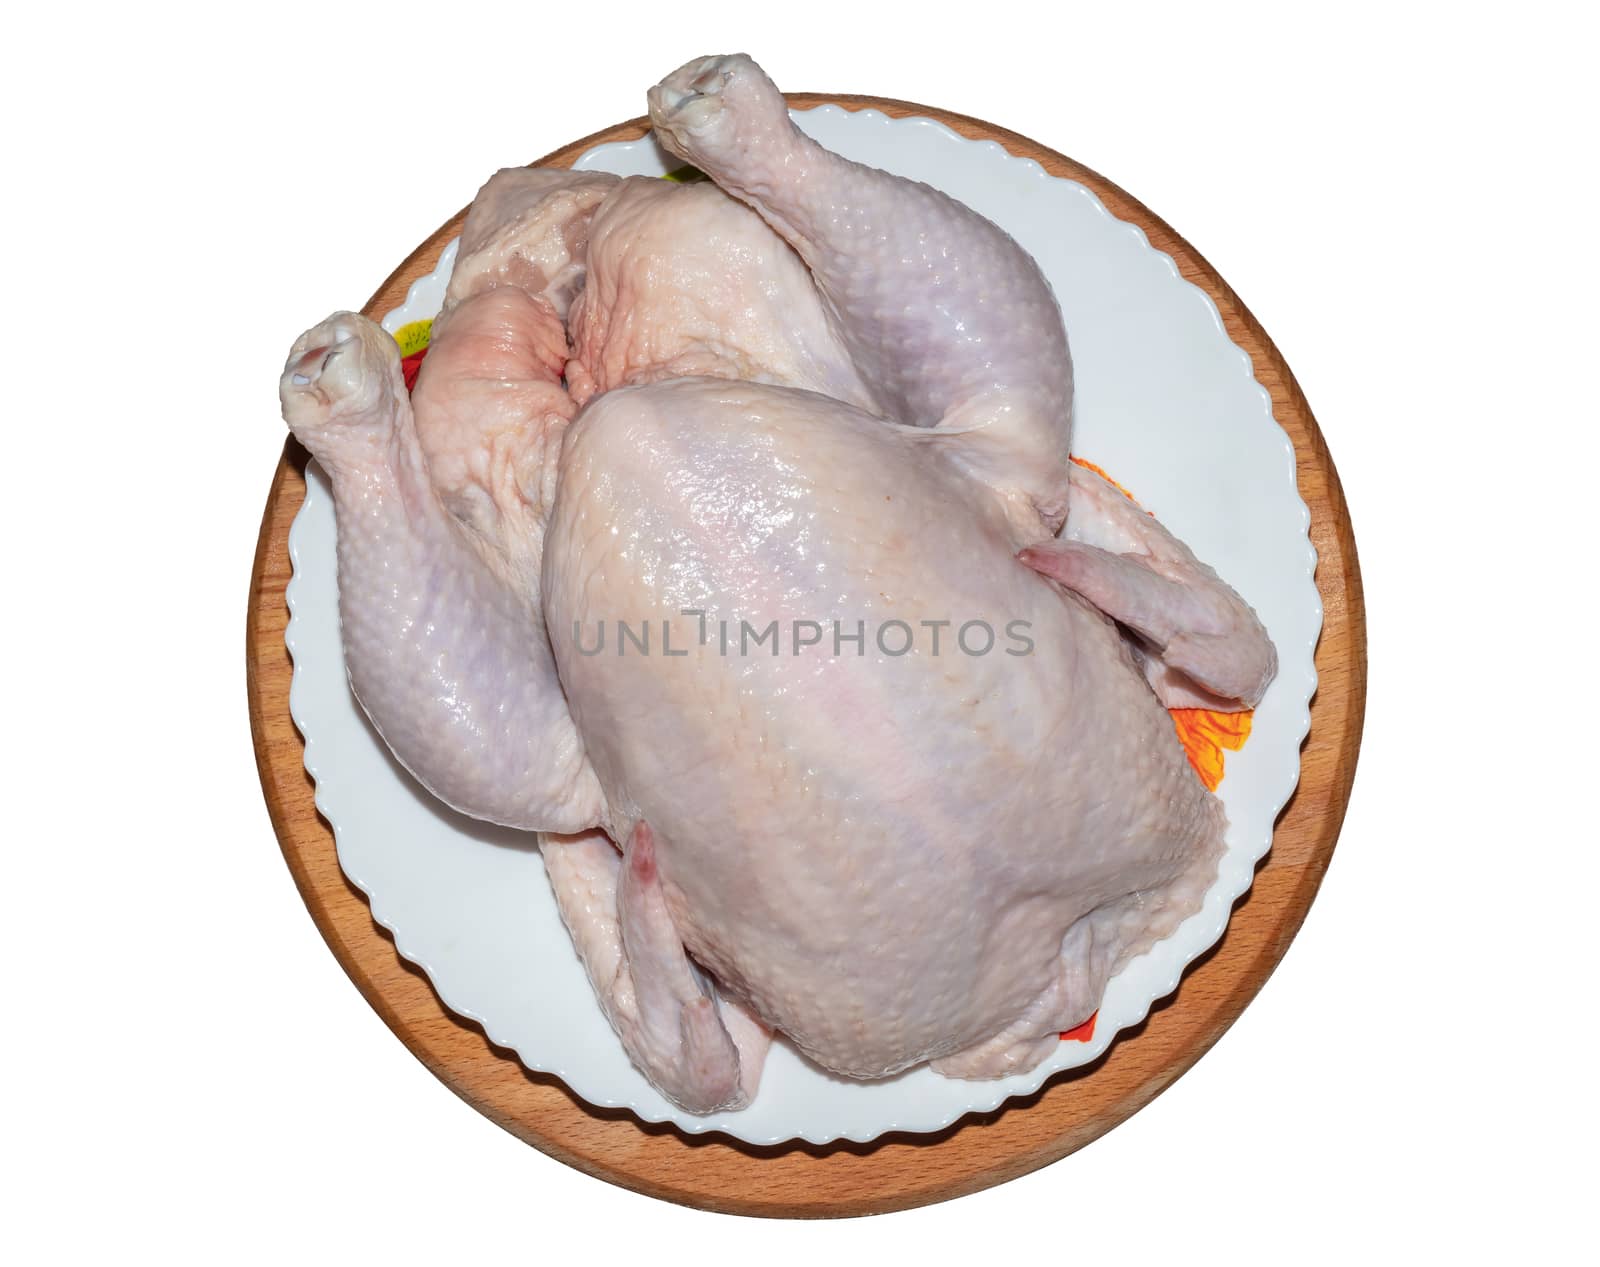 A top close-up shot of a whole chicken on a plate and wooden board. Isolated on white background.